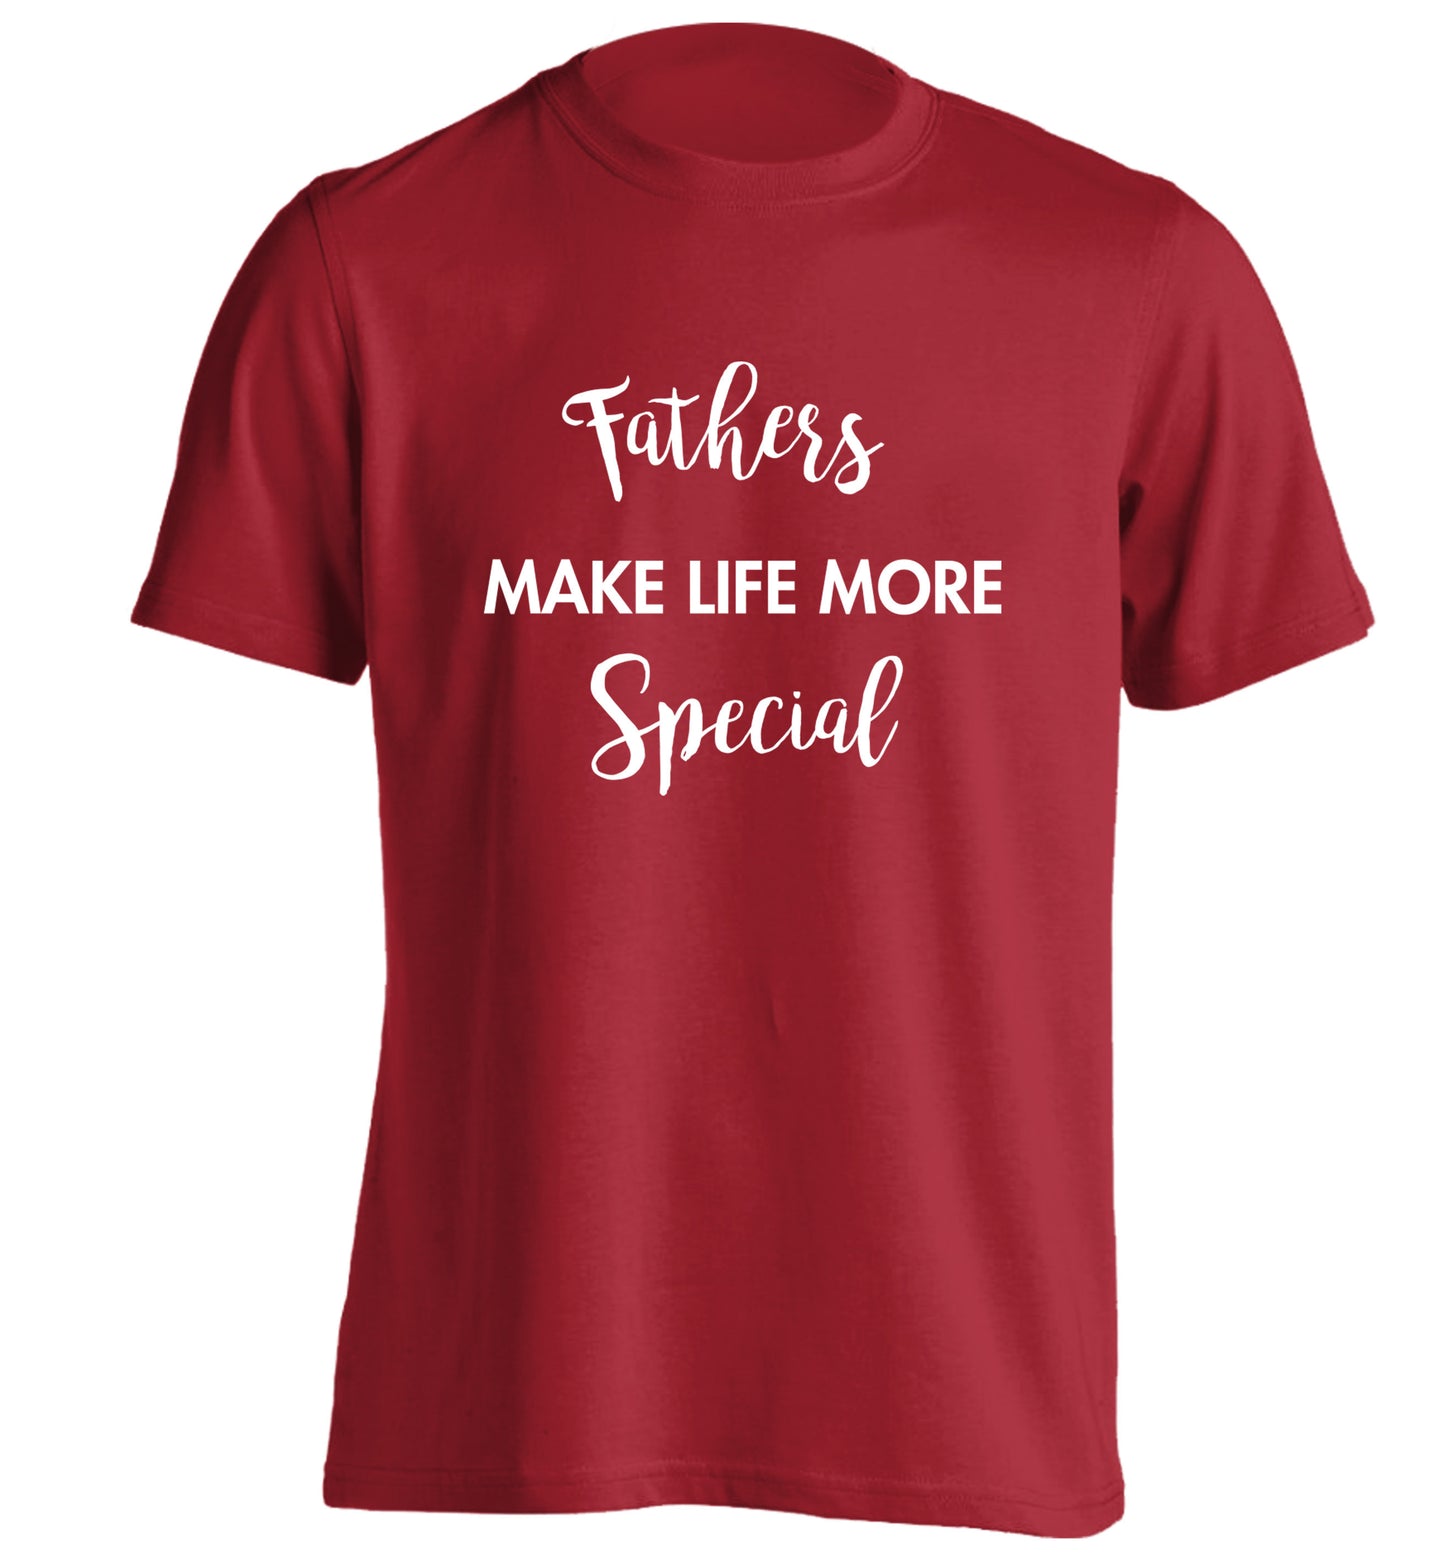 Fathers make life more special adults unisex red Tshirt 2XL